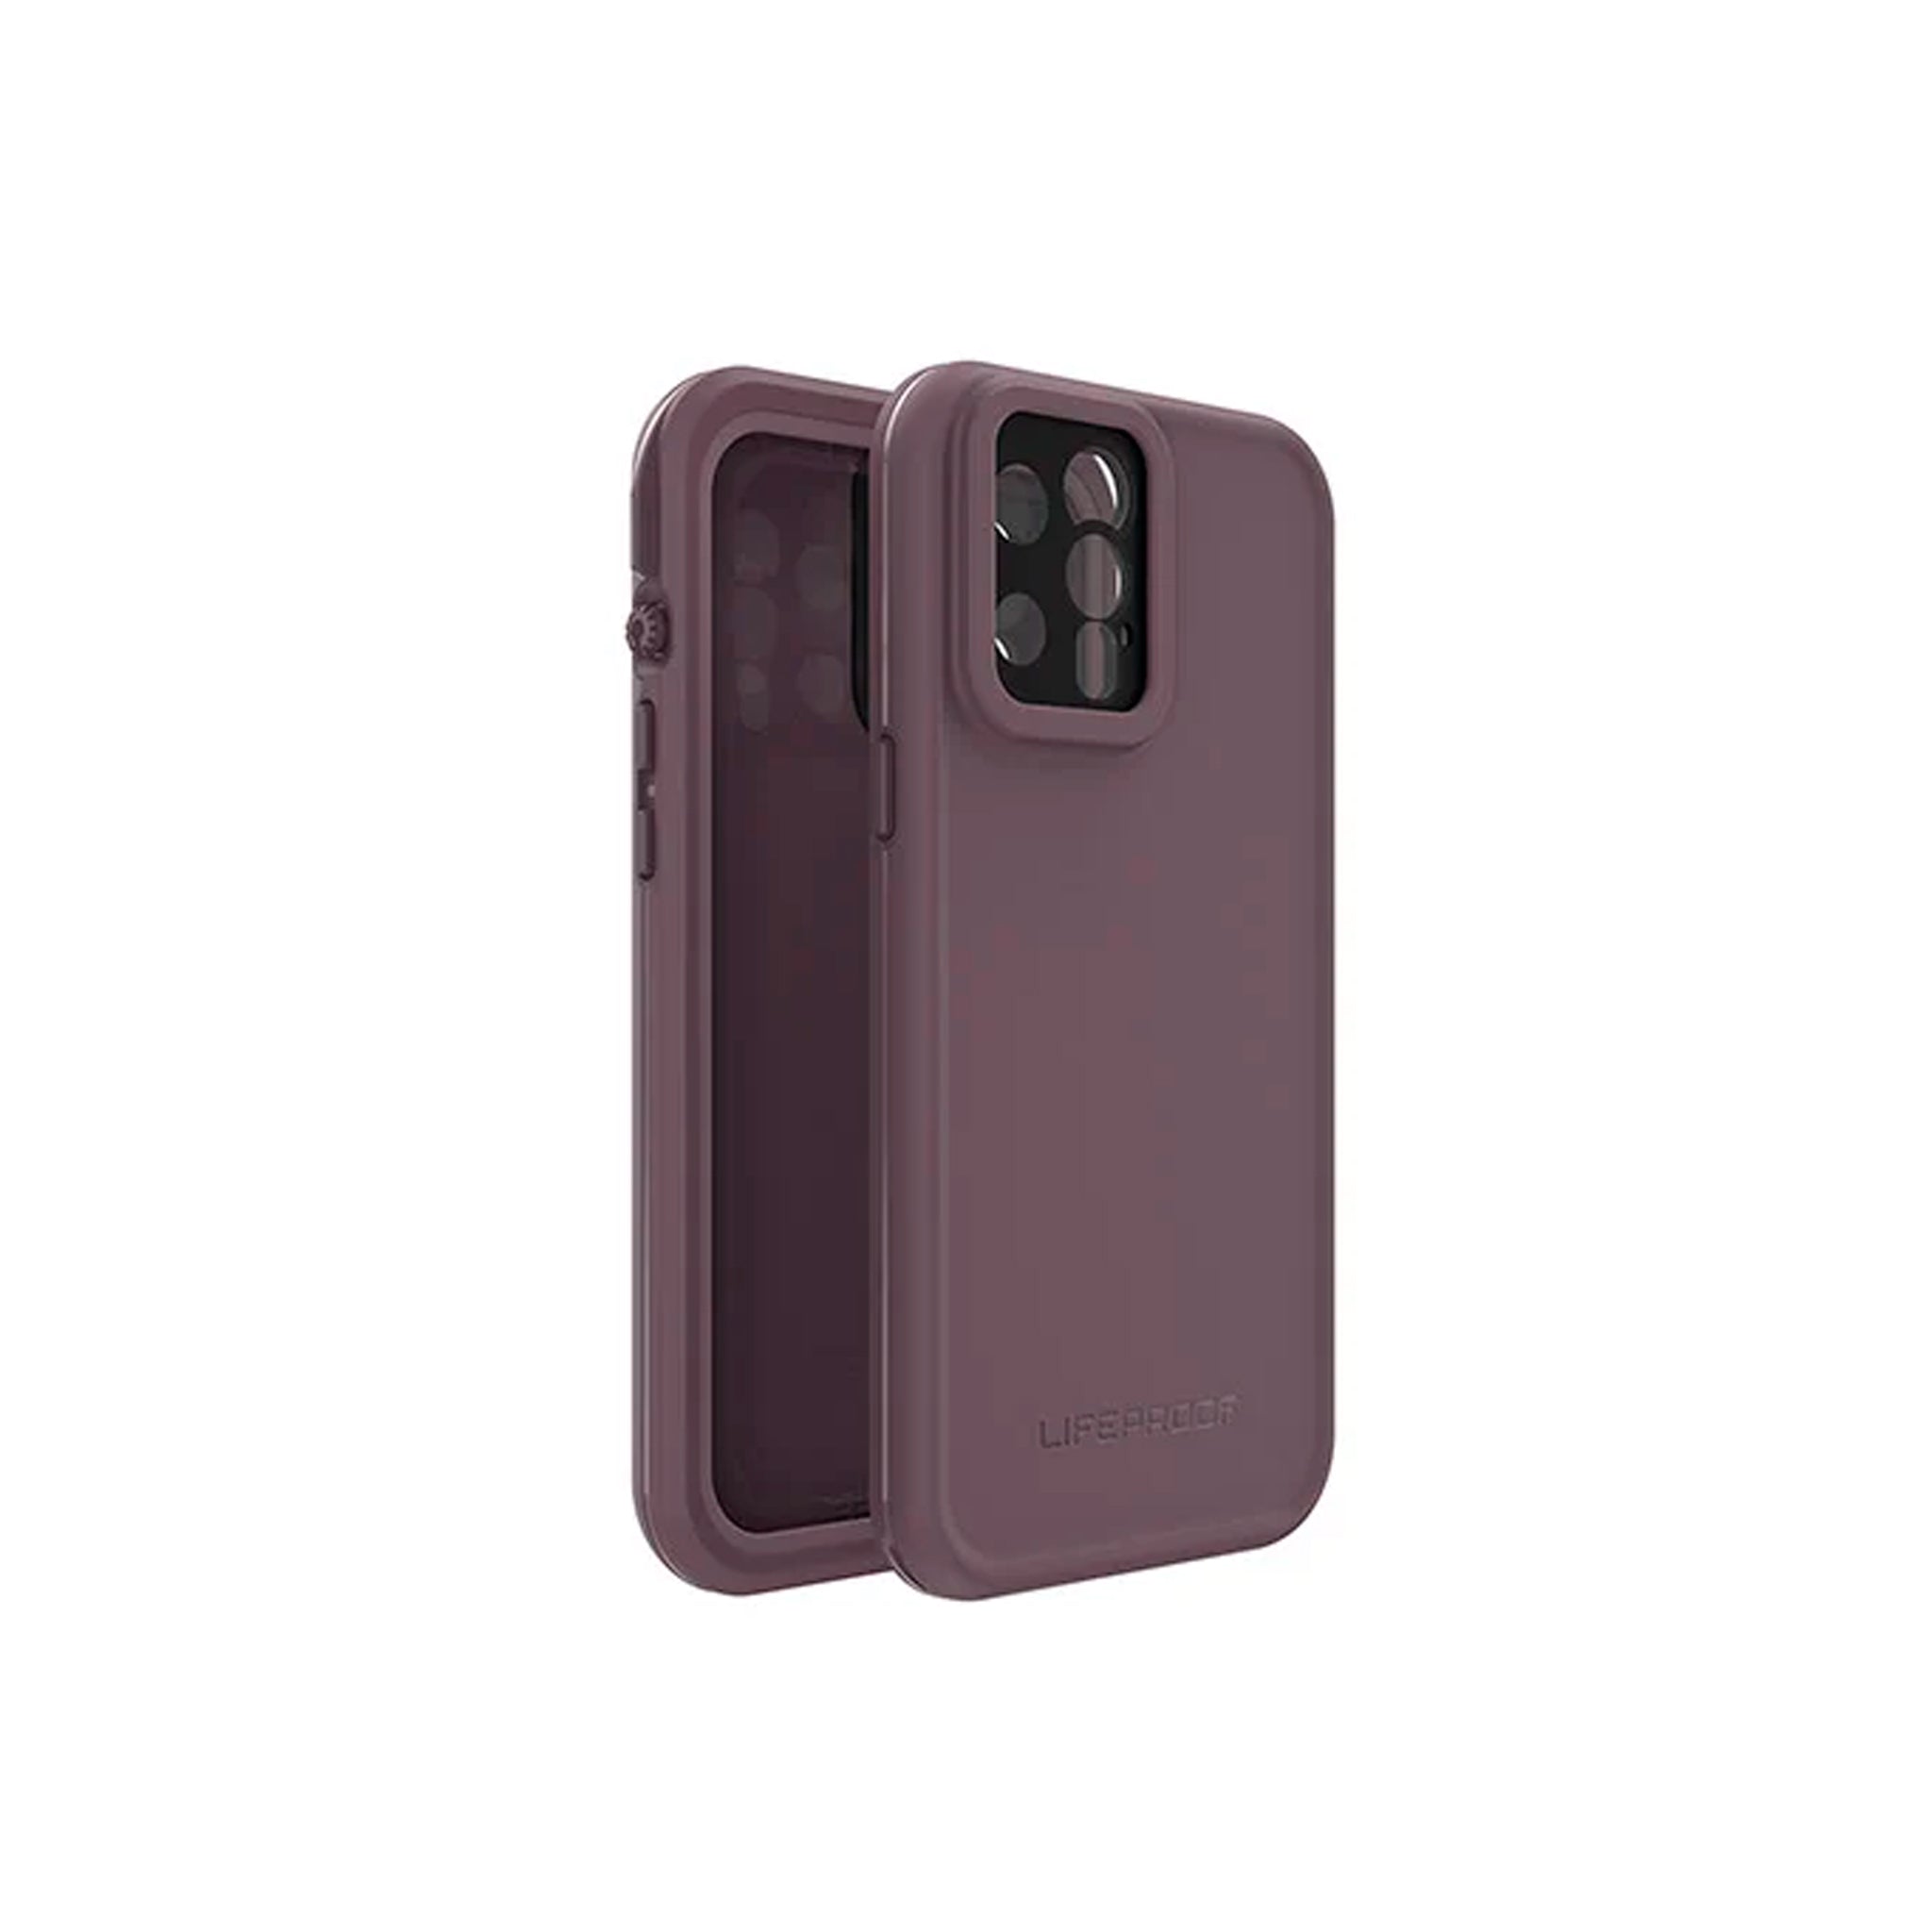 LifeProof -  Fre for iPhone 12 Pro Max - Ocean Violet